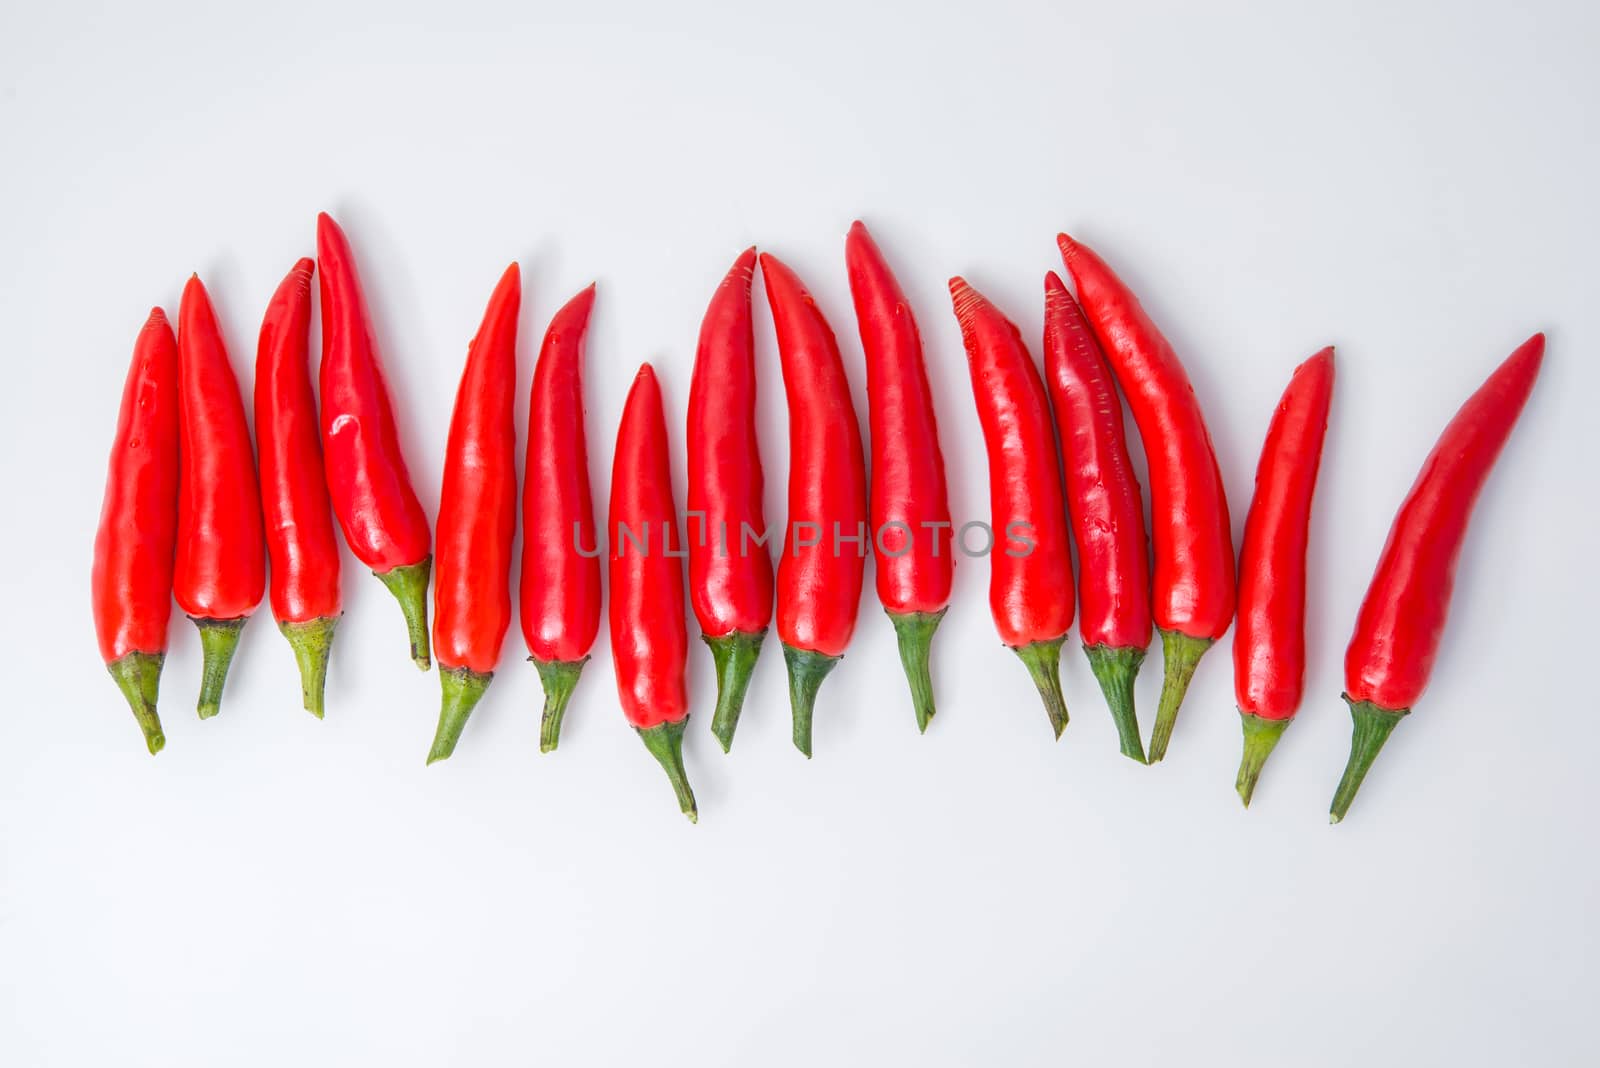 row of red pepper isolated on white background by antpkr